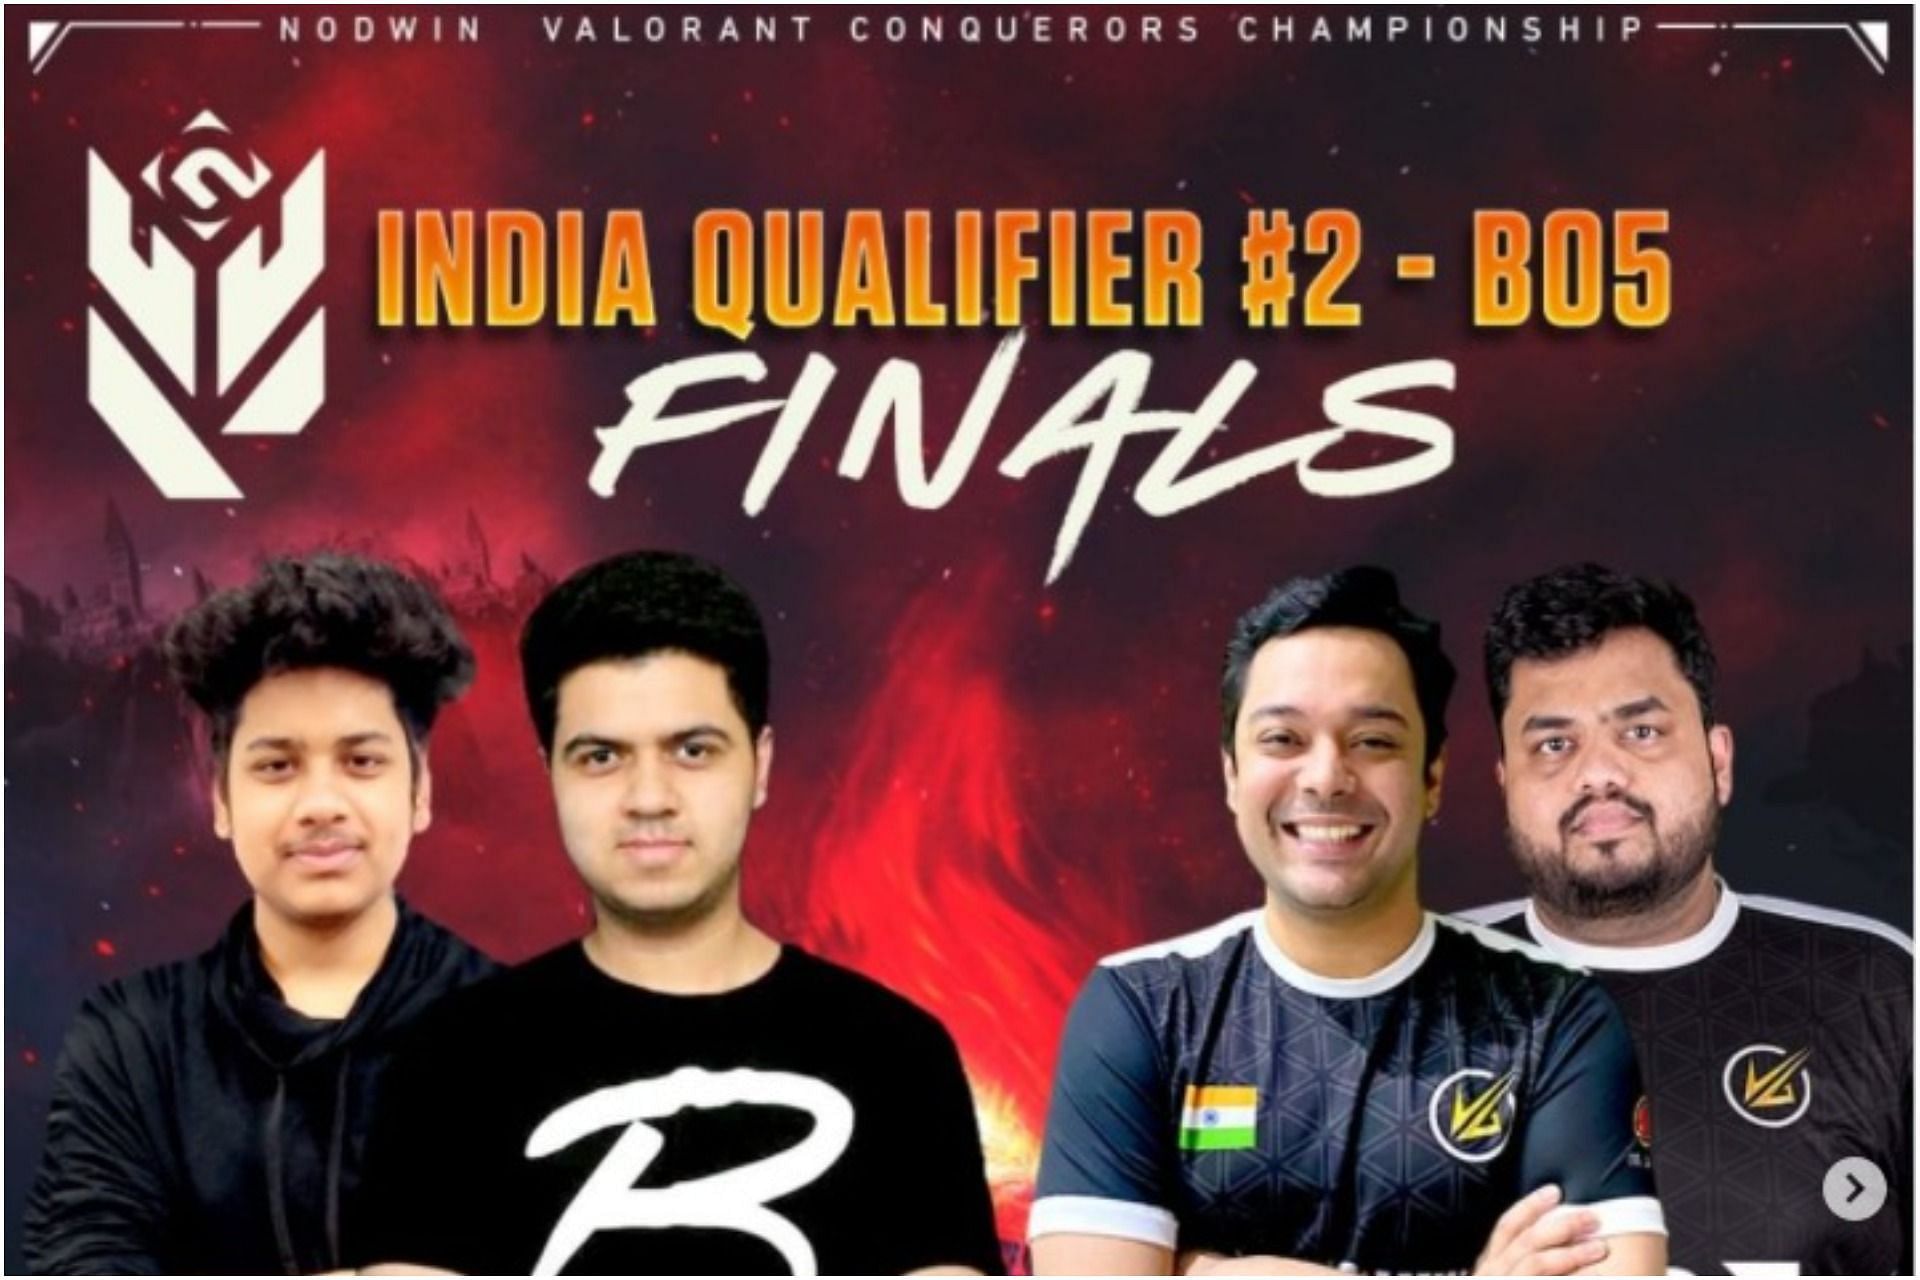 God Particles vs Velocity Gaming in Valorant Conquerors Championship India Qualifier 1 grand final (Image via Nodwin Gaming)